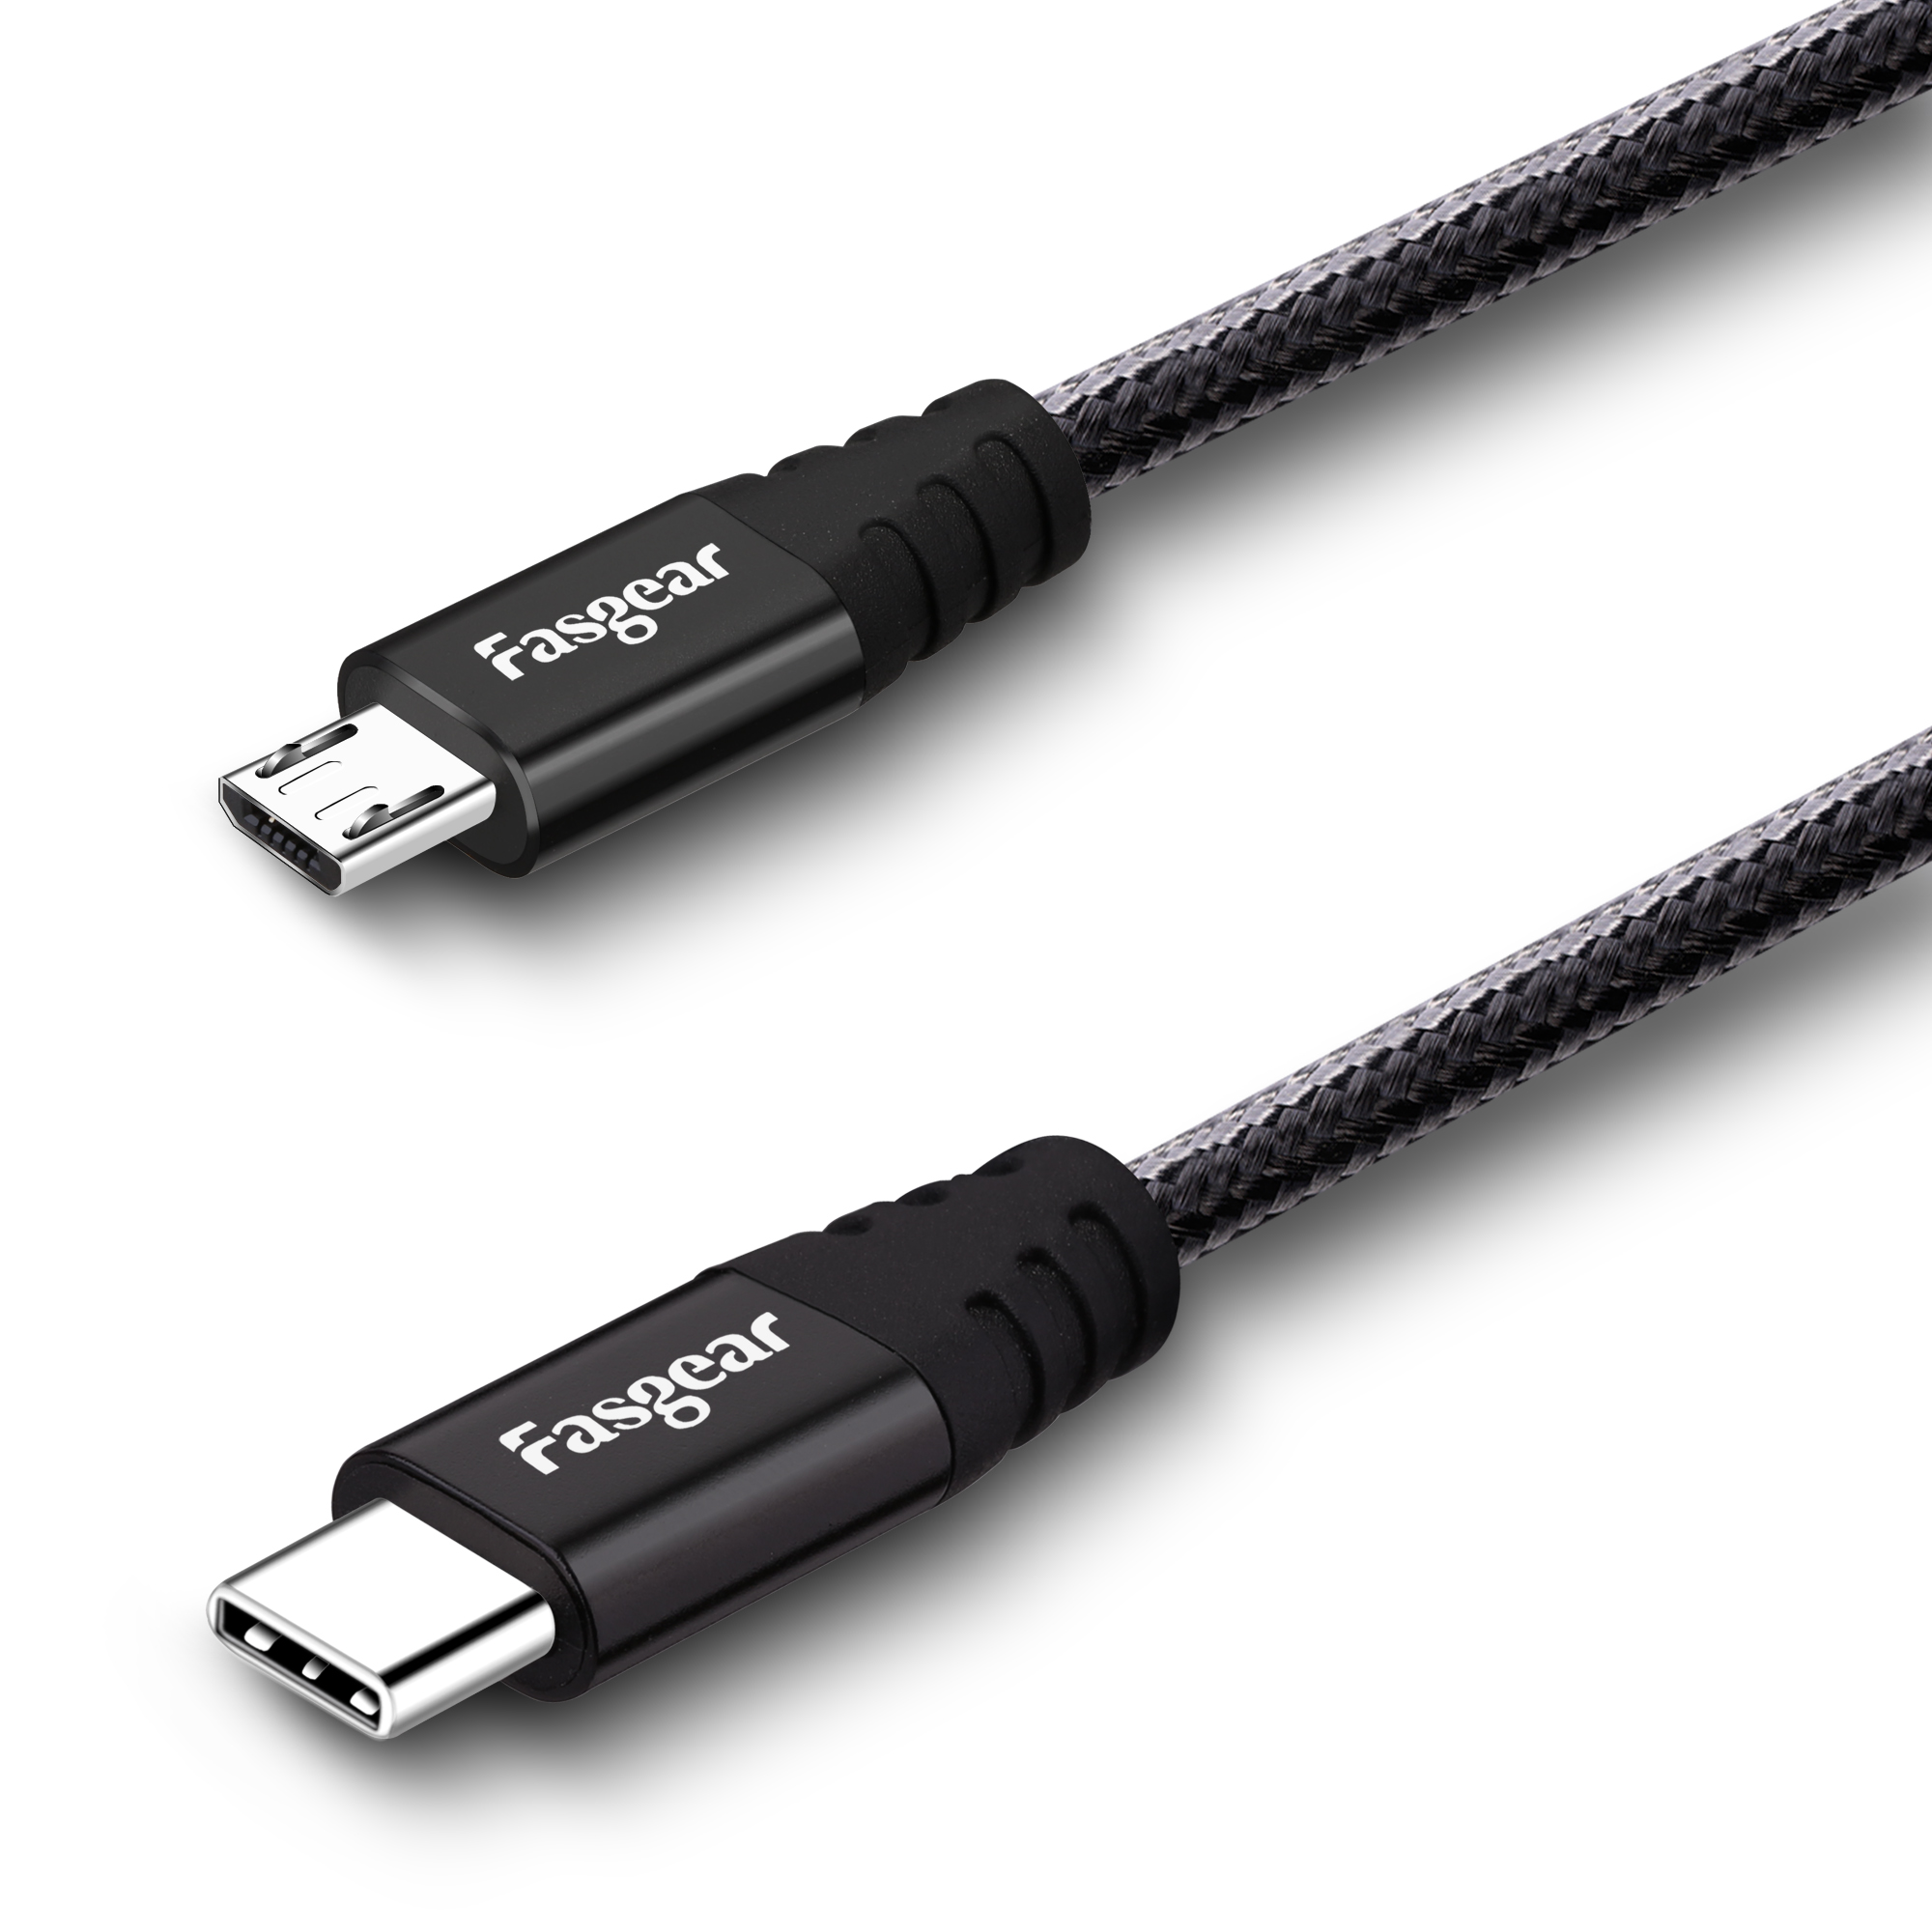 Fasgear USB C Cable 3 Pack 3ft+6ft+10ft Nylon Braided USB Type C Fast Charging Sync Cable Compatible with Moto G6 G7 Galaxy S10 S9 S8 S8 Gray Note 9 Oneplus 7 7pro Sony Xperia XZ Huawei P30 P20